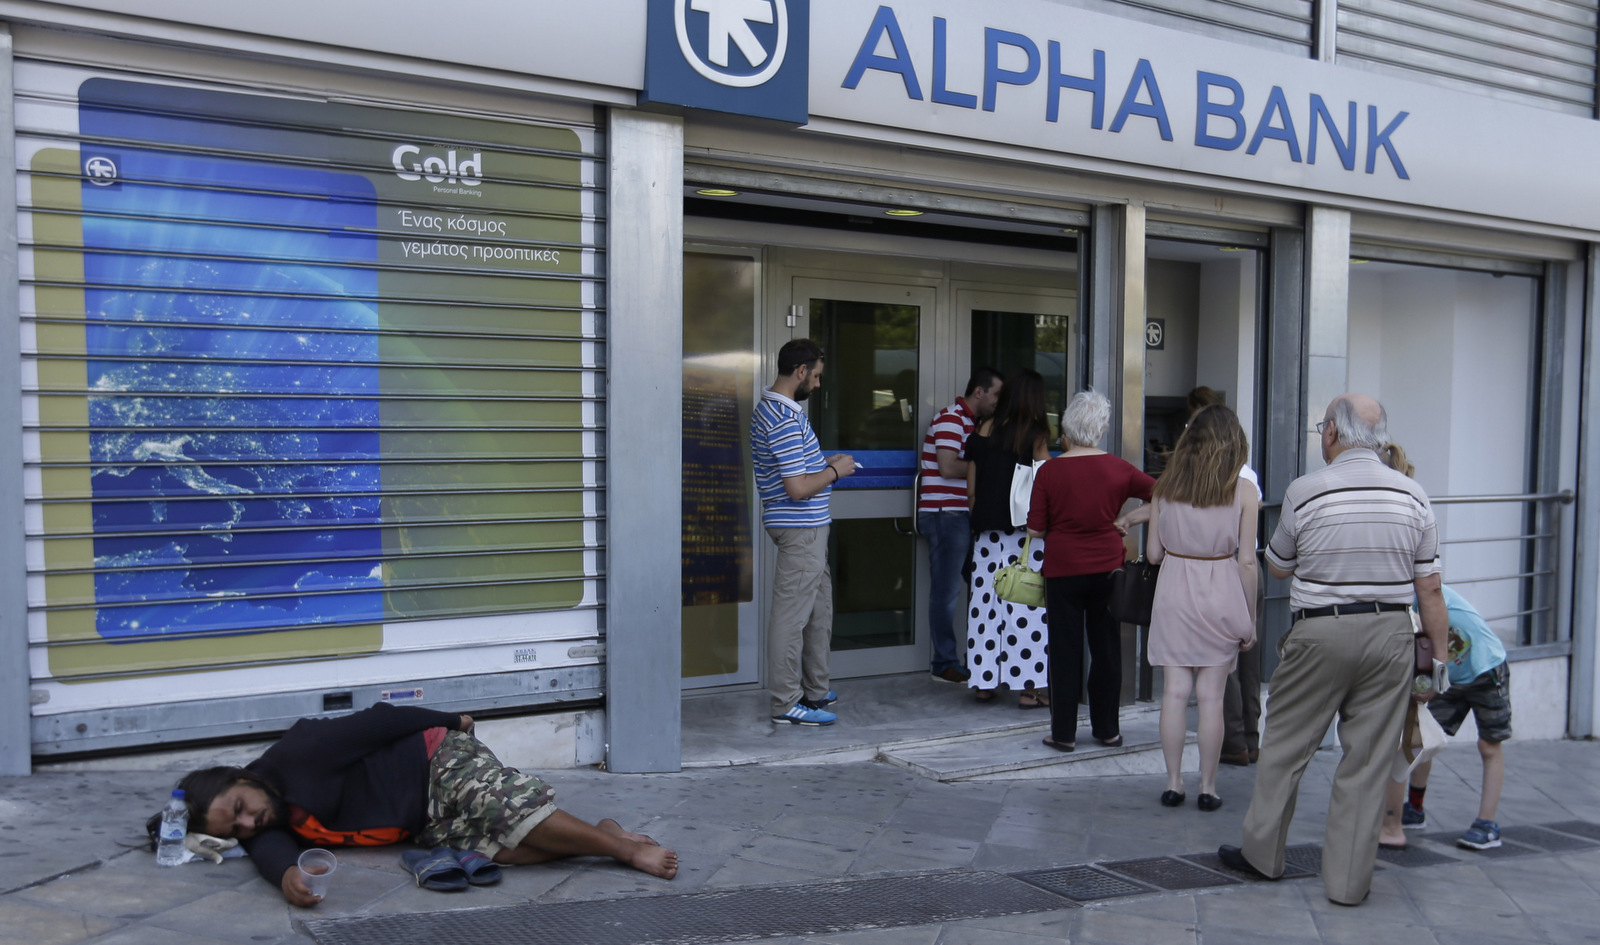 People queue in front of a bank for an ATM as a man lies on the ground begging for change, in Athens. (AP/Thanassis Stavrakis)